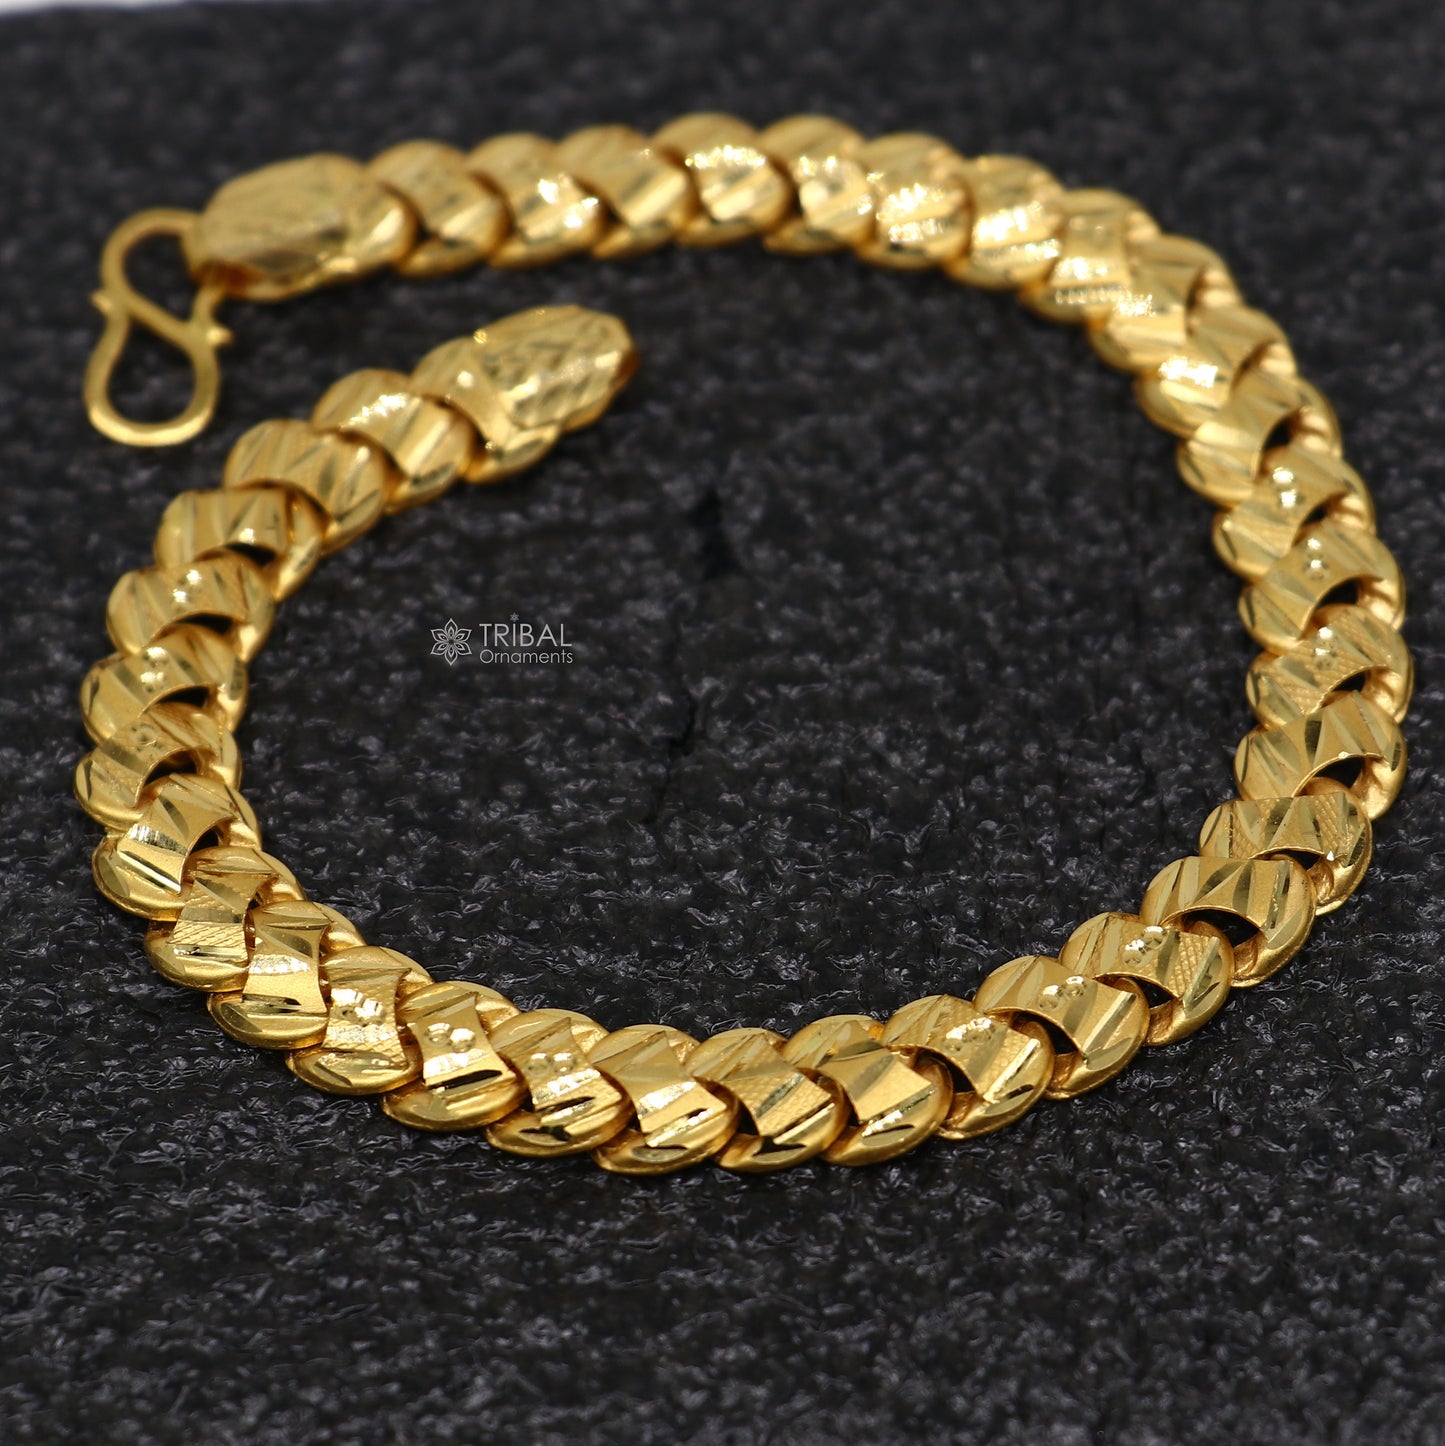 Exclusive trendy unique design handmade 22kt  yellow gold All size bracelet best men's wedding gifting jewelry from india gbr77 - TRIBAL ORNAMENTS